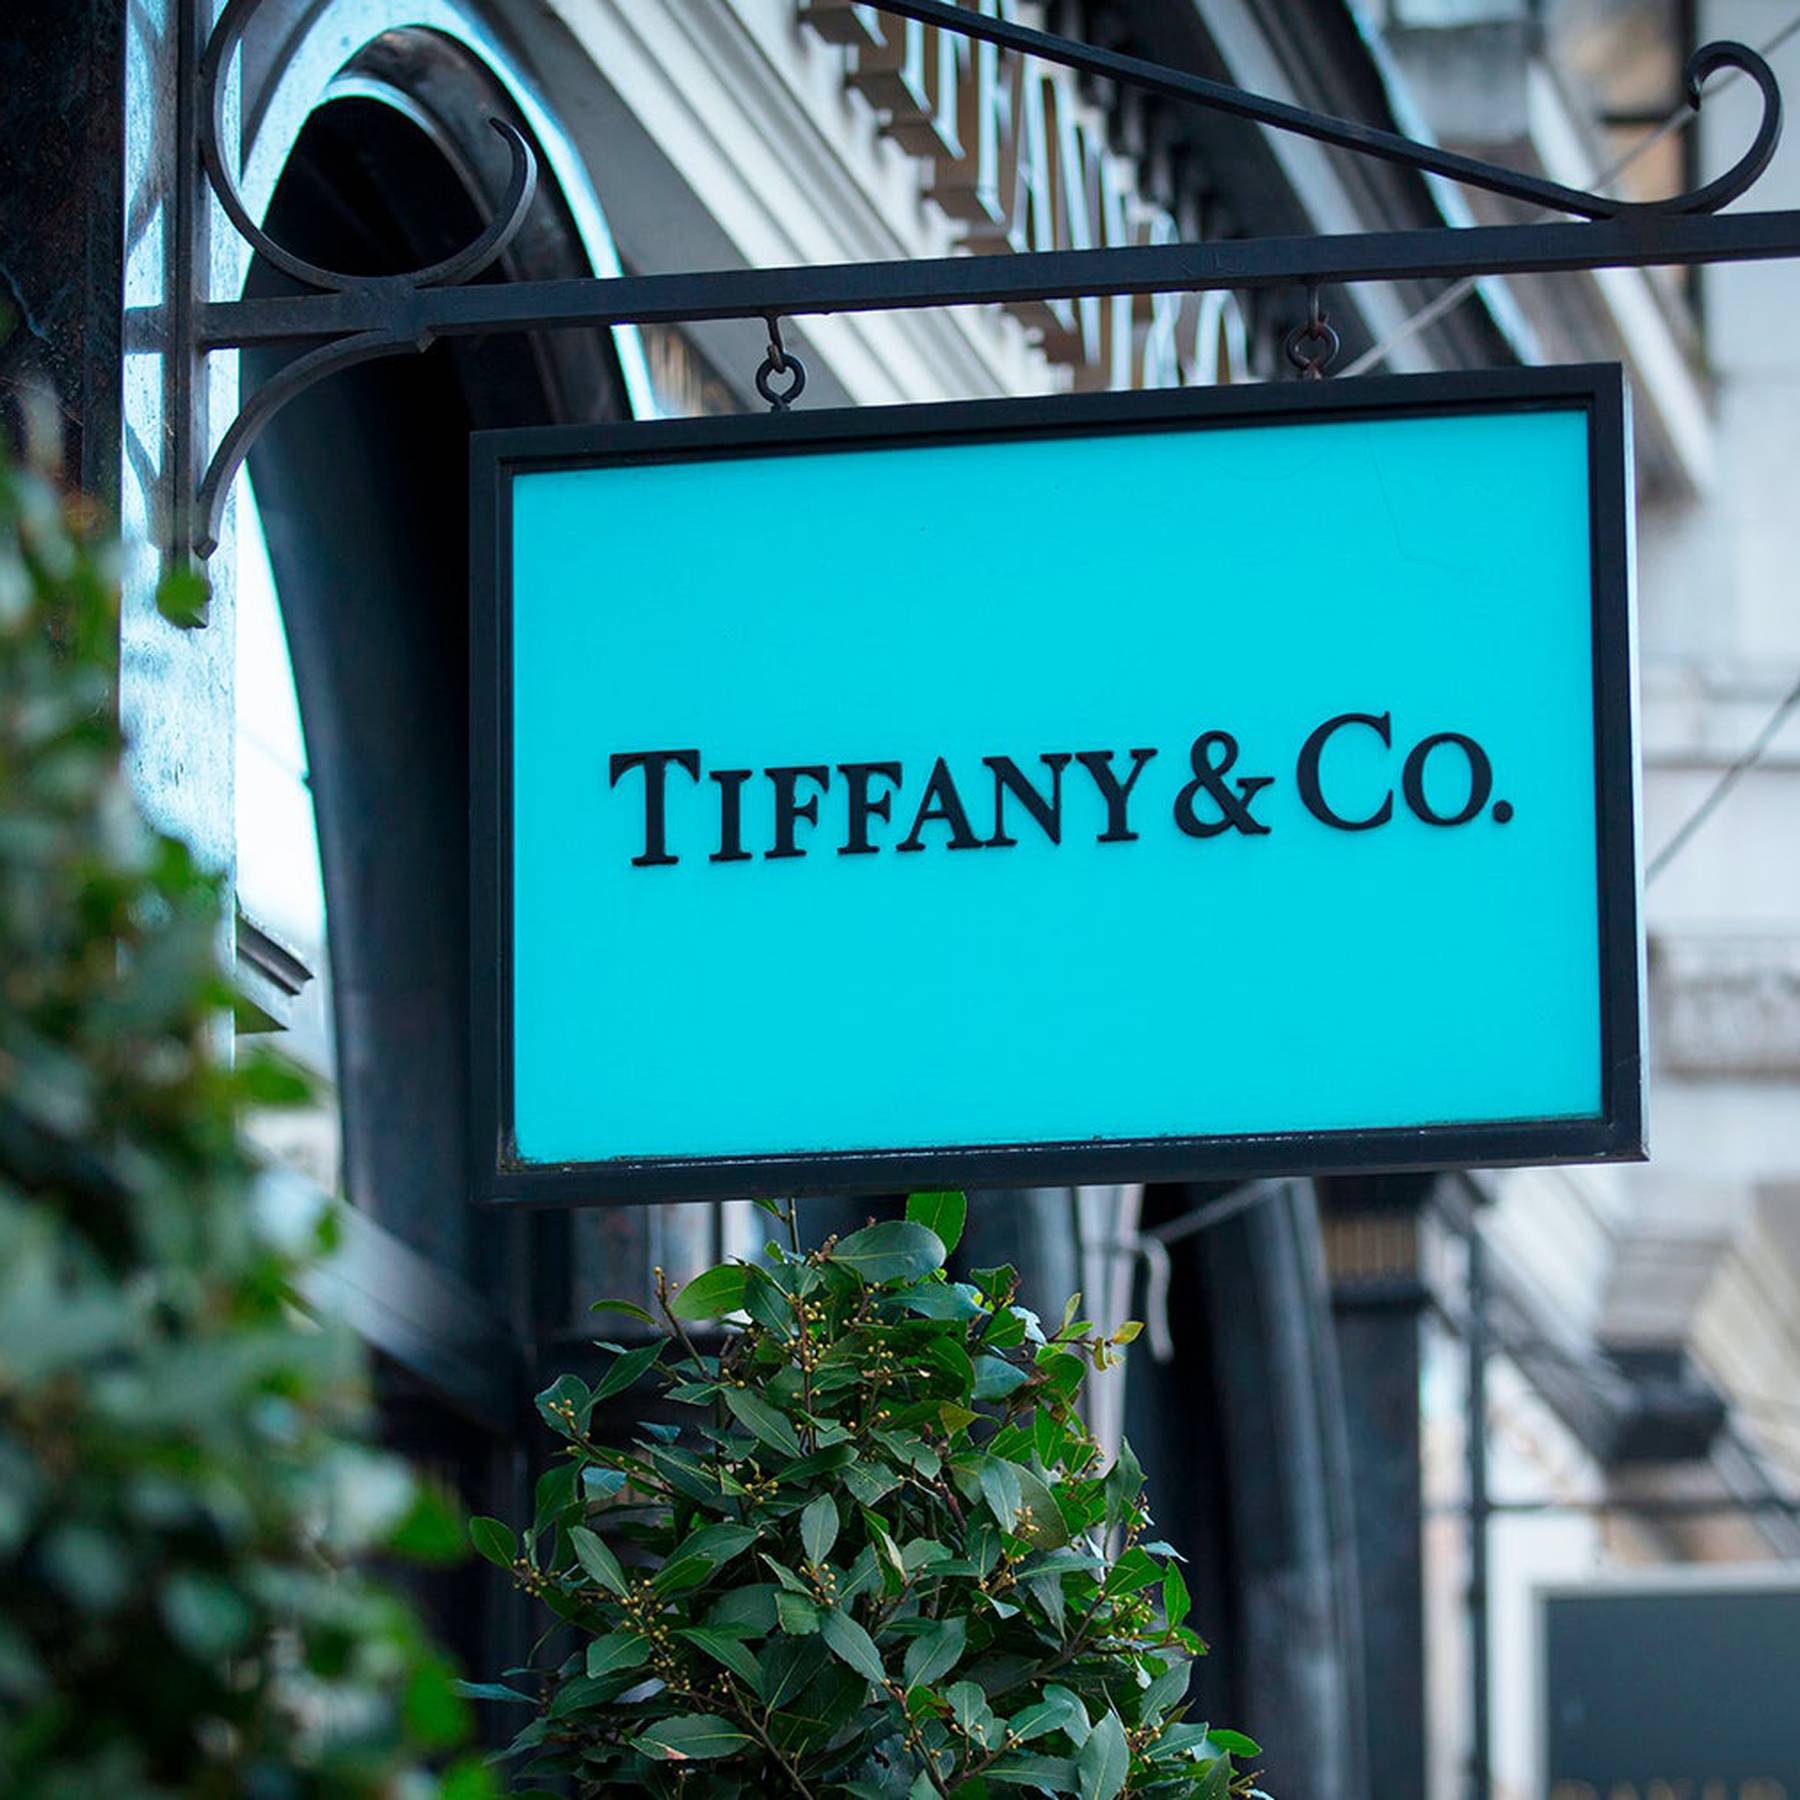 Tiffany & Co solves the problem of what to buy the man who has